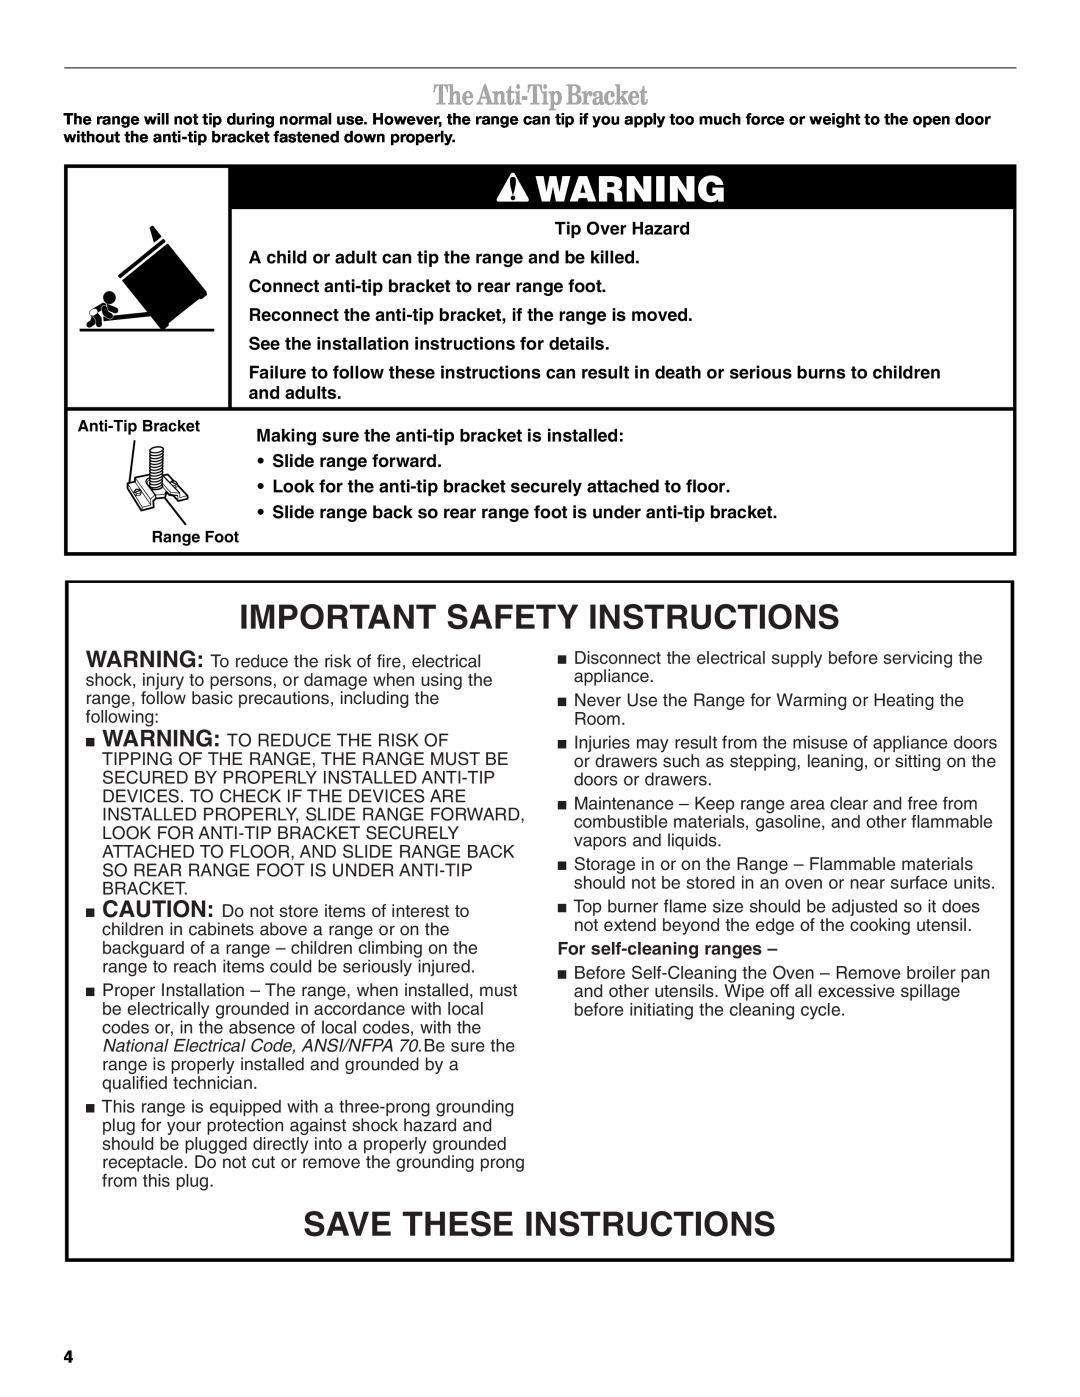 Whirlpool SF380LEK TheAnti-Tip Bracket, Important Safety Instructions, Save These Instructions, For self-cleaning ranges 